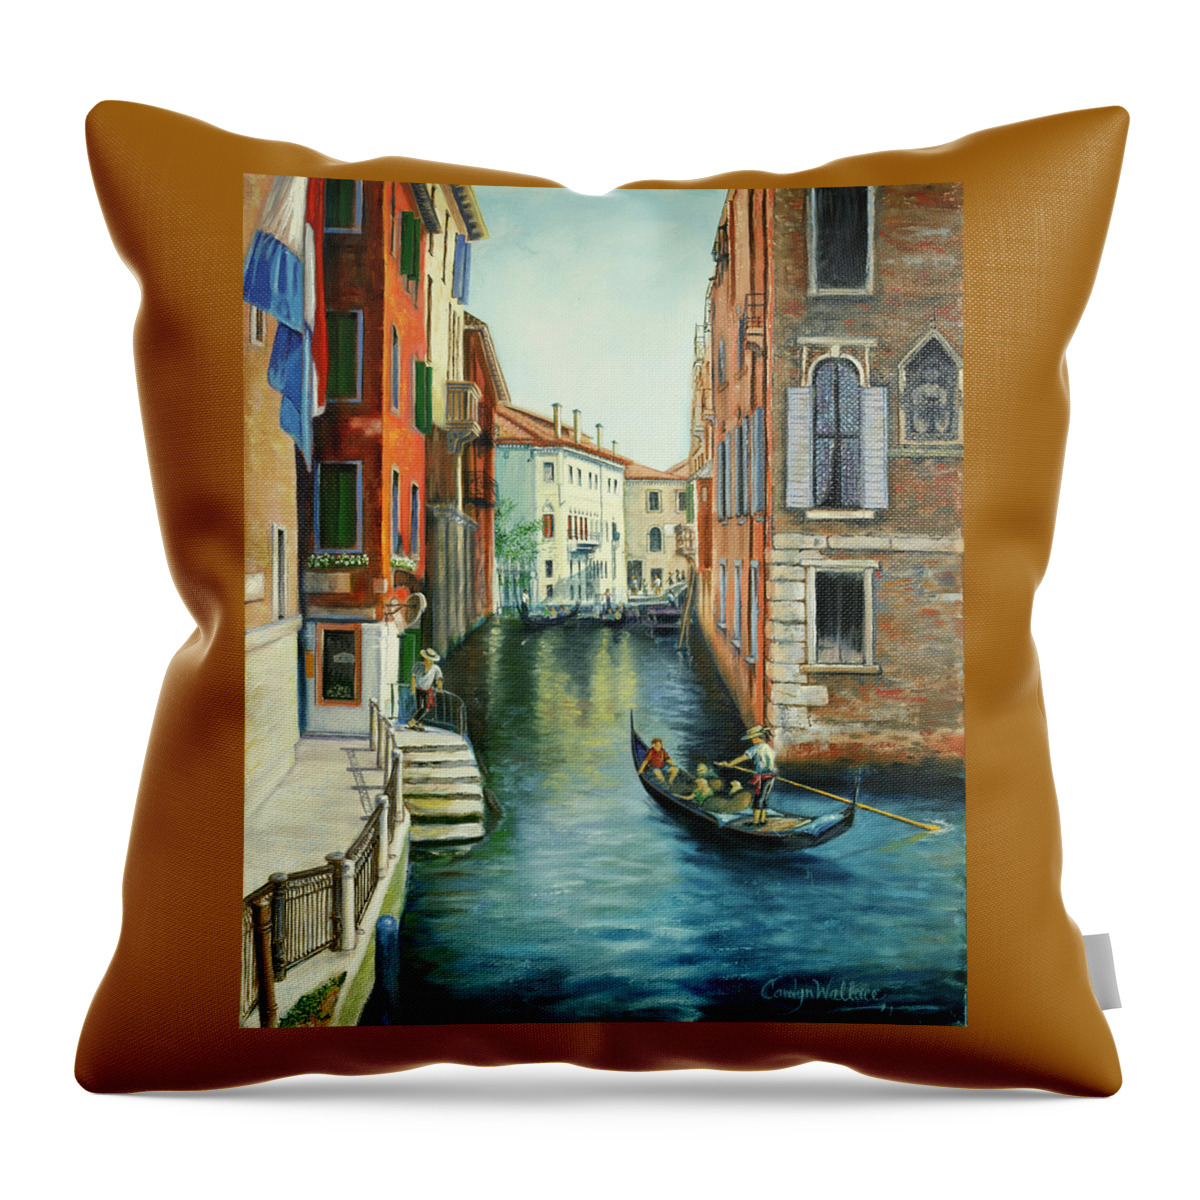 Europe Throw Pillow featuring the painting Sempre Ricordare -To Always Remember by Carolyn Coffey Wallace